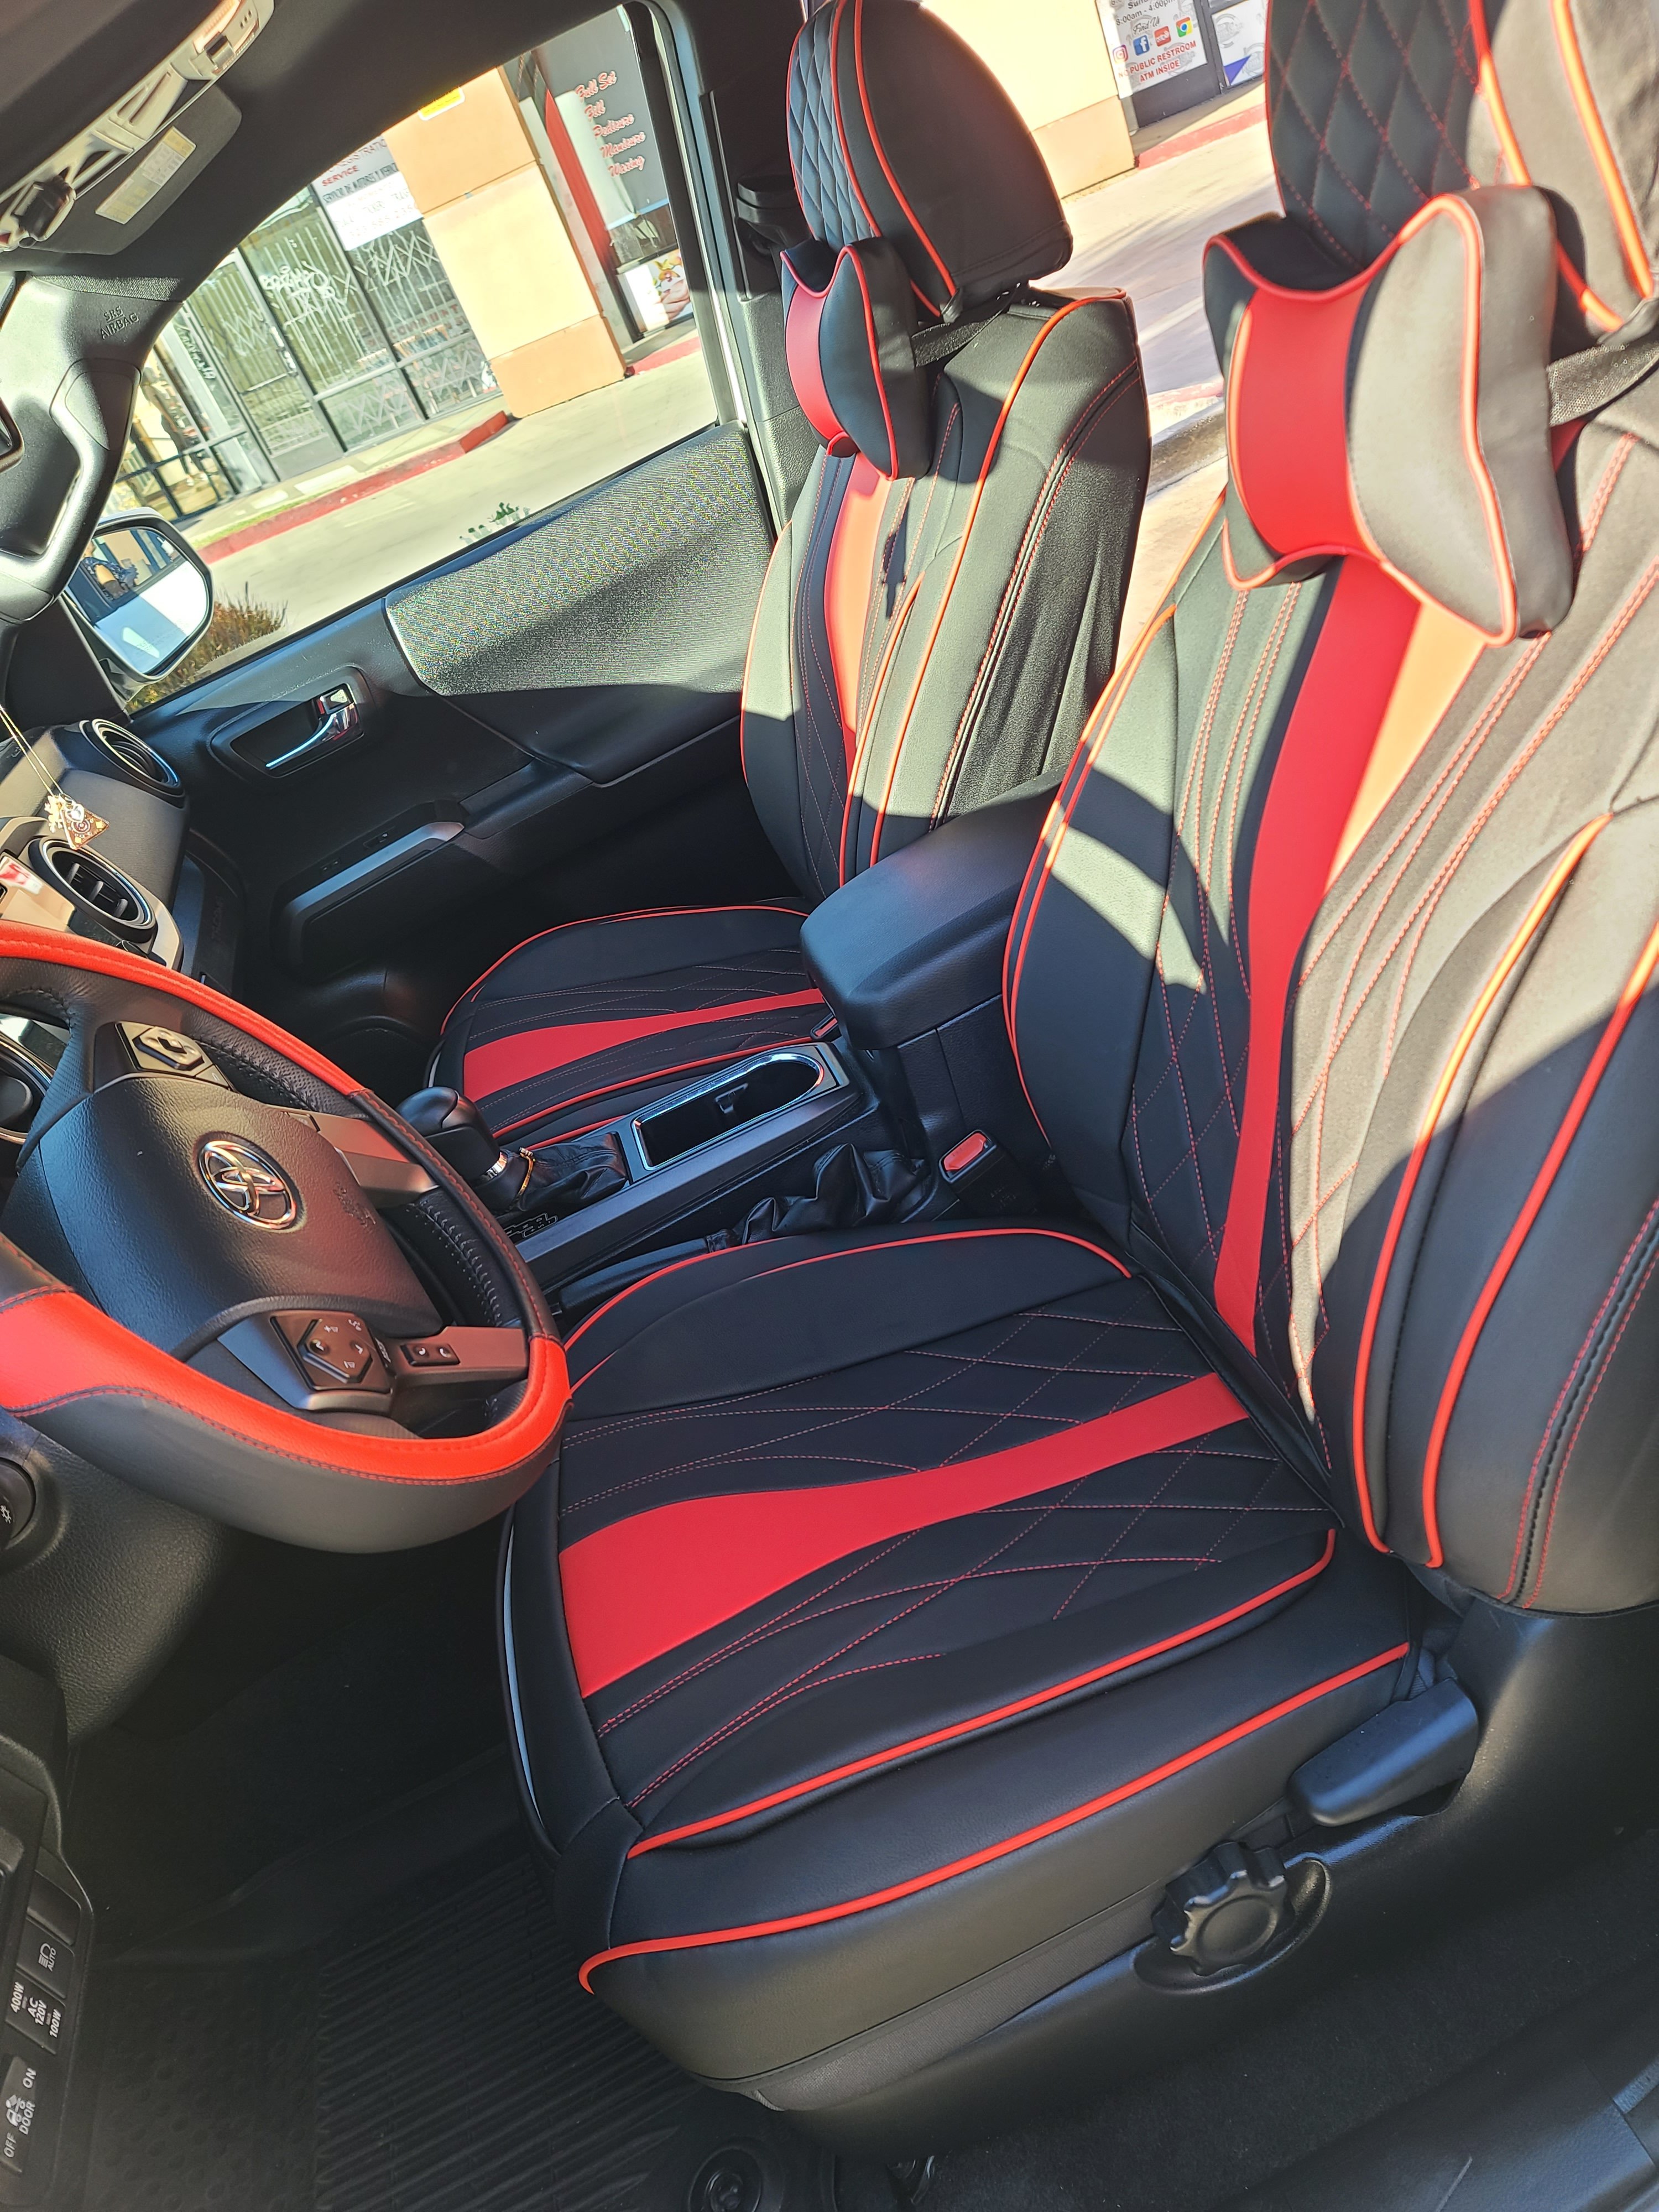 2018 Toyota Tacoma Seat Cover Installed – Car Seat Cover and Custom Car